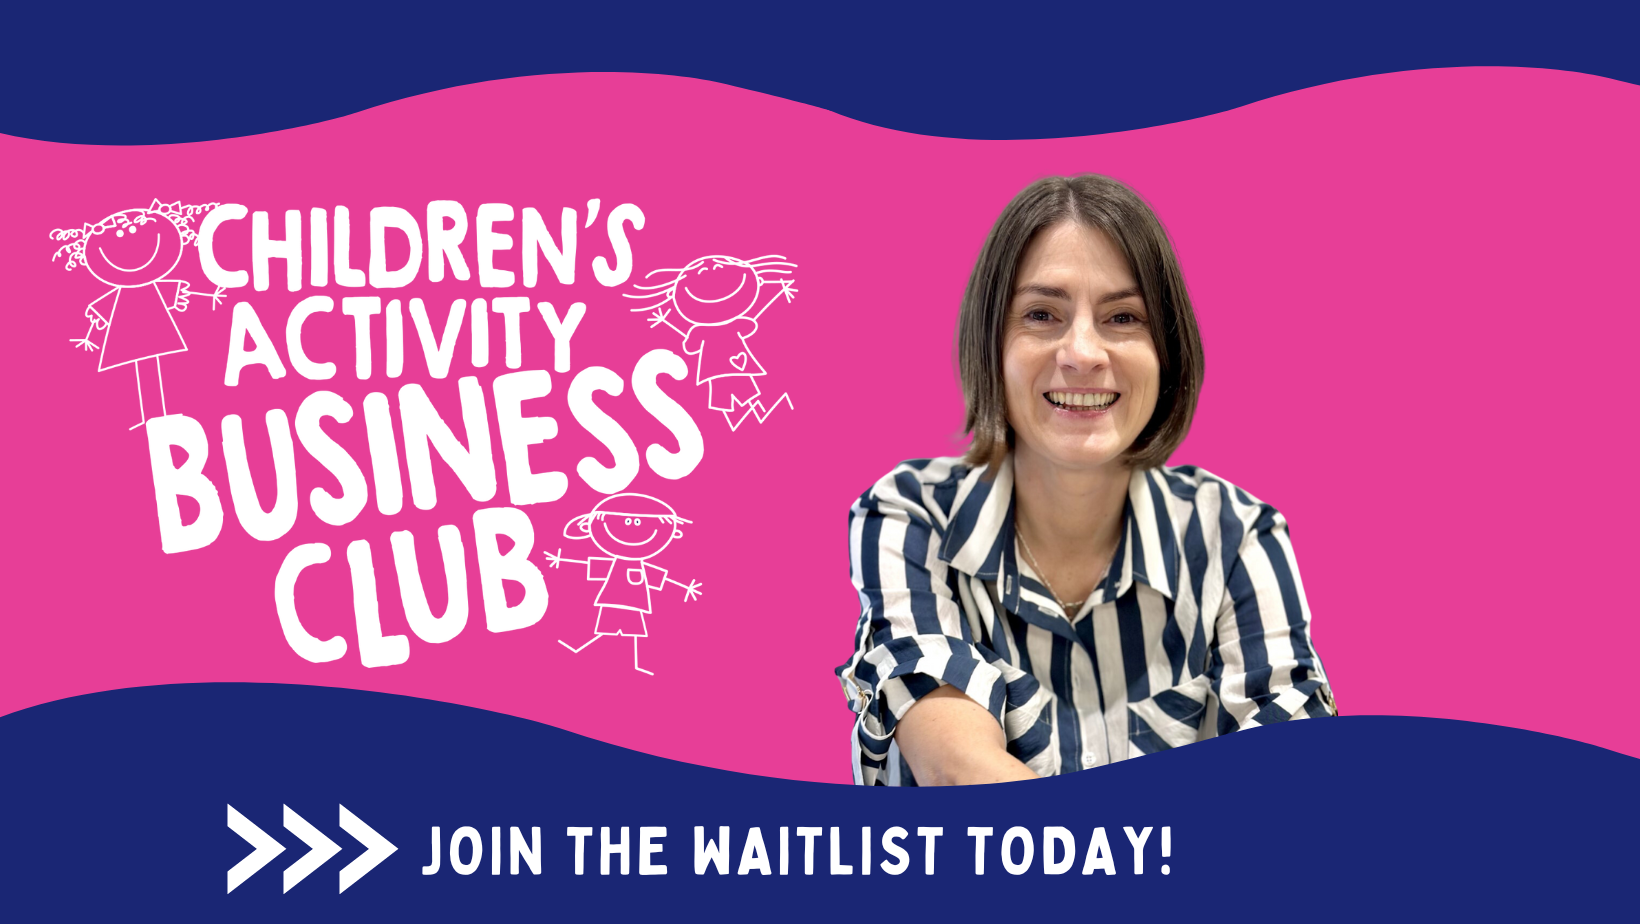 Children's Activity Business Club with Kristine Monaghan